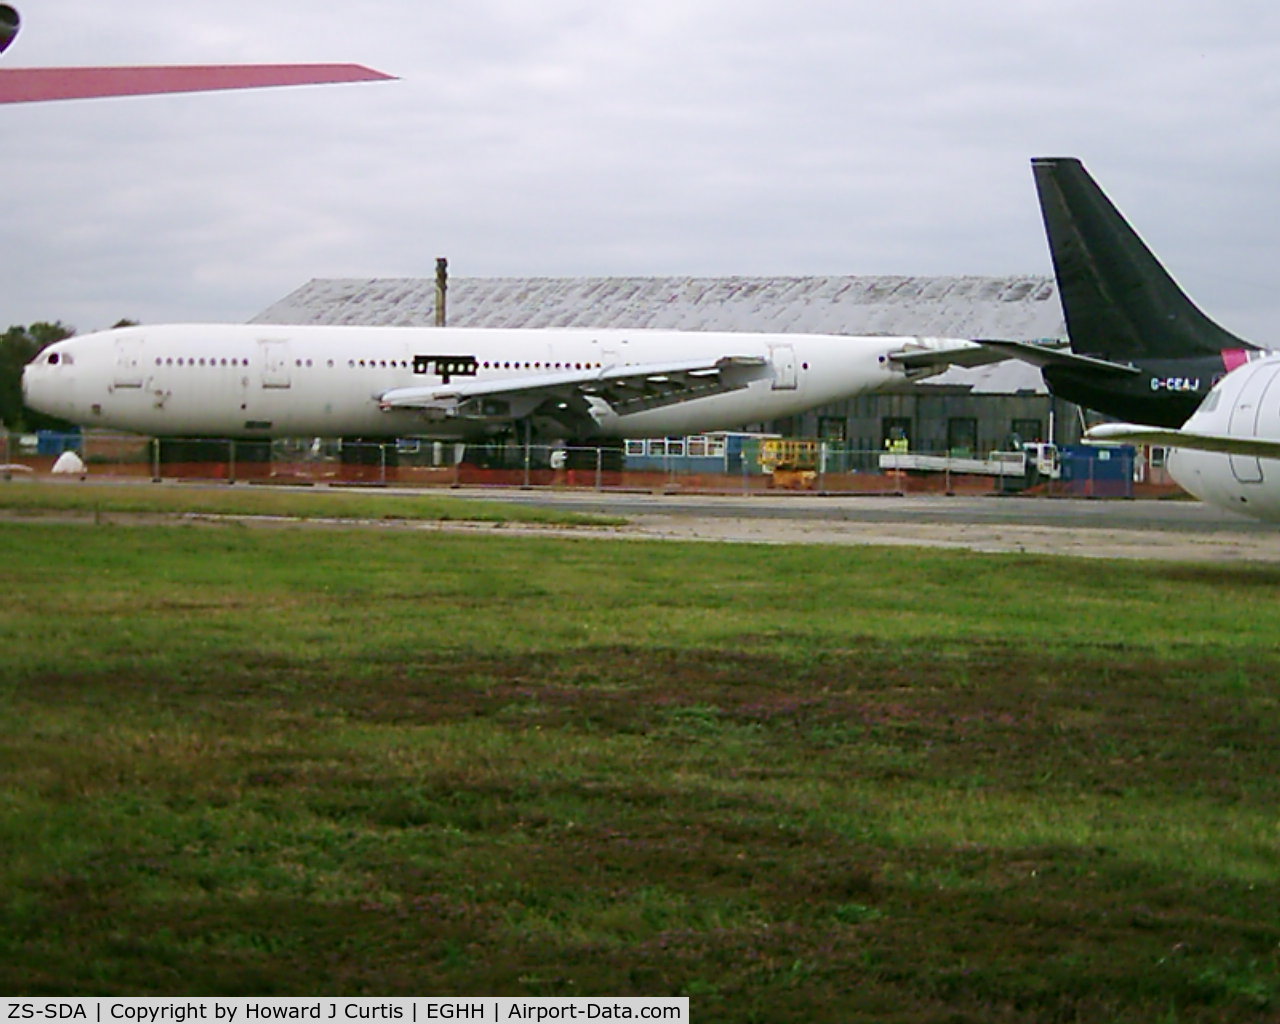 ZS-SDA, 1976 Airbus A300B2K-3C C/N 032, June 2001. Broken up here in June 2001. Date is approximate.